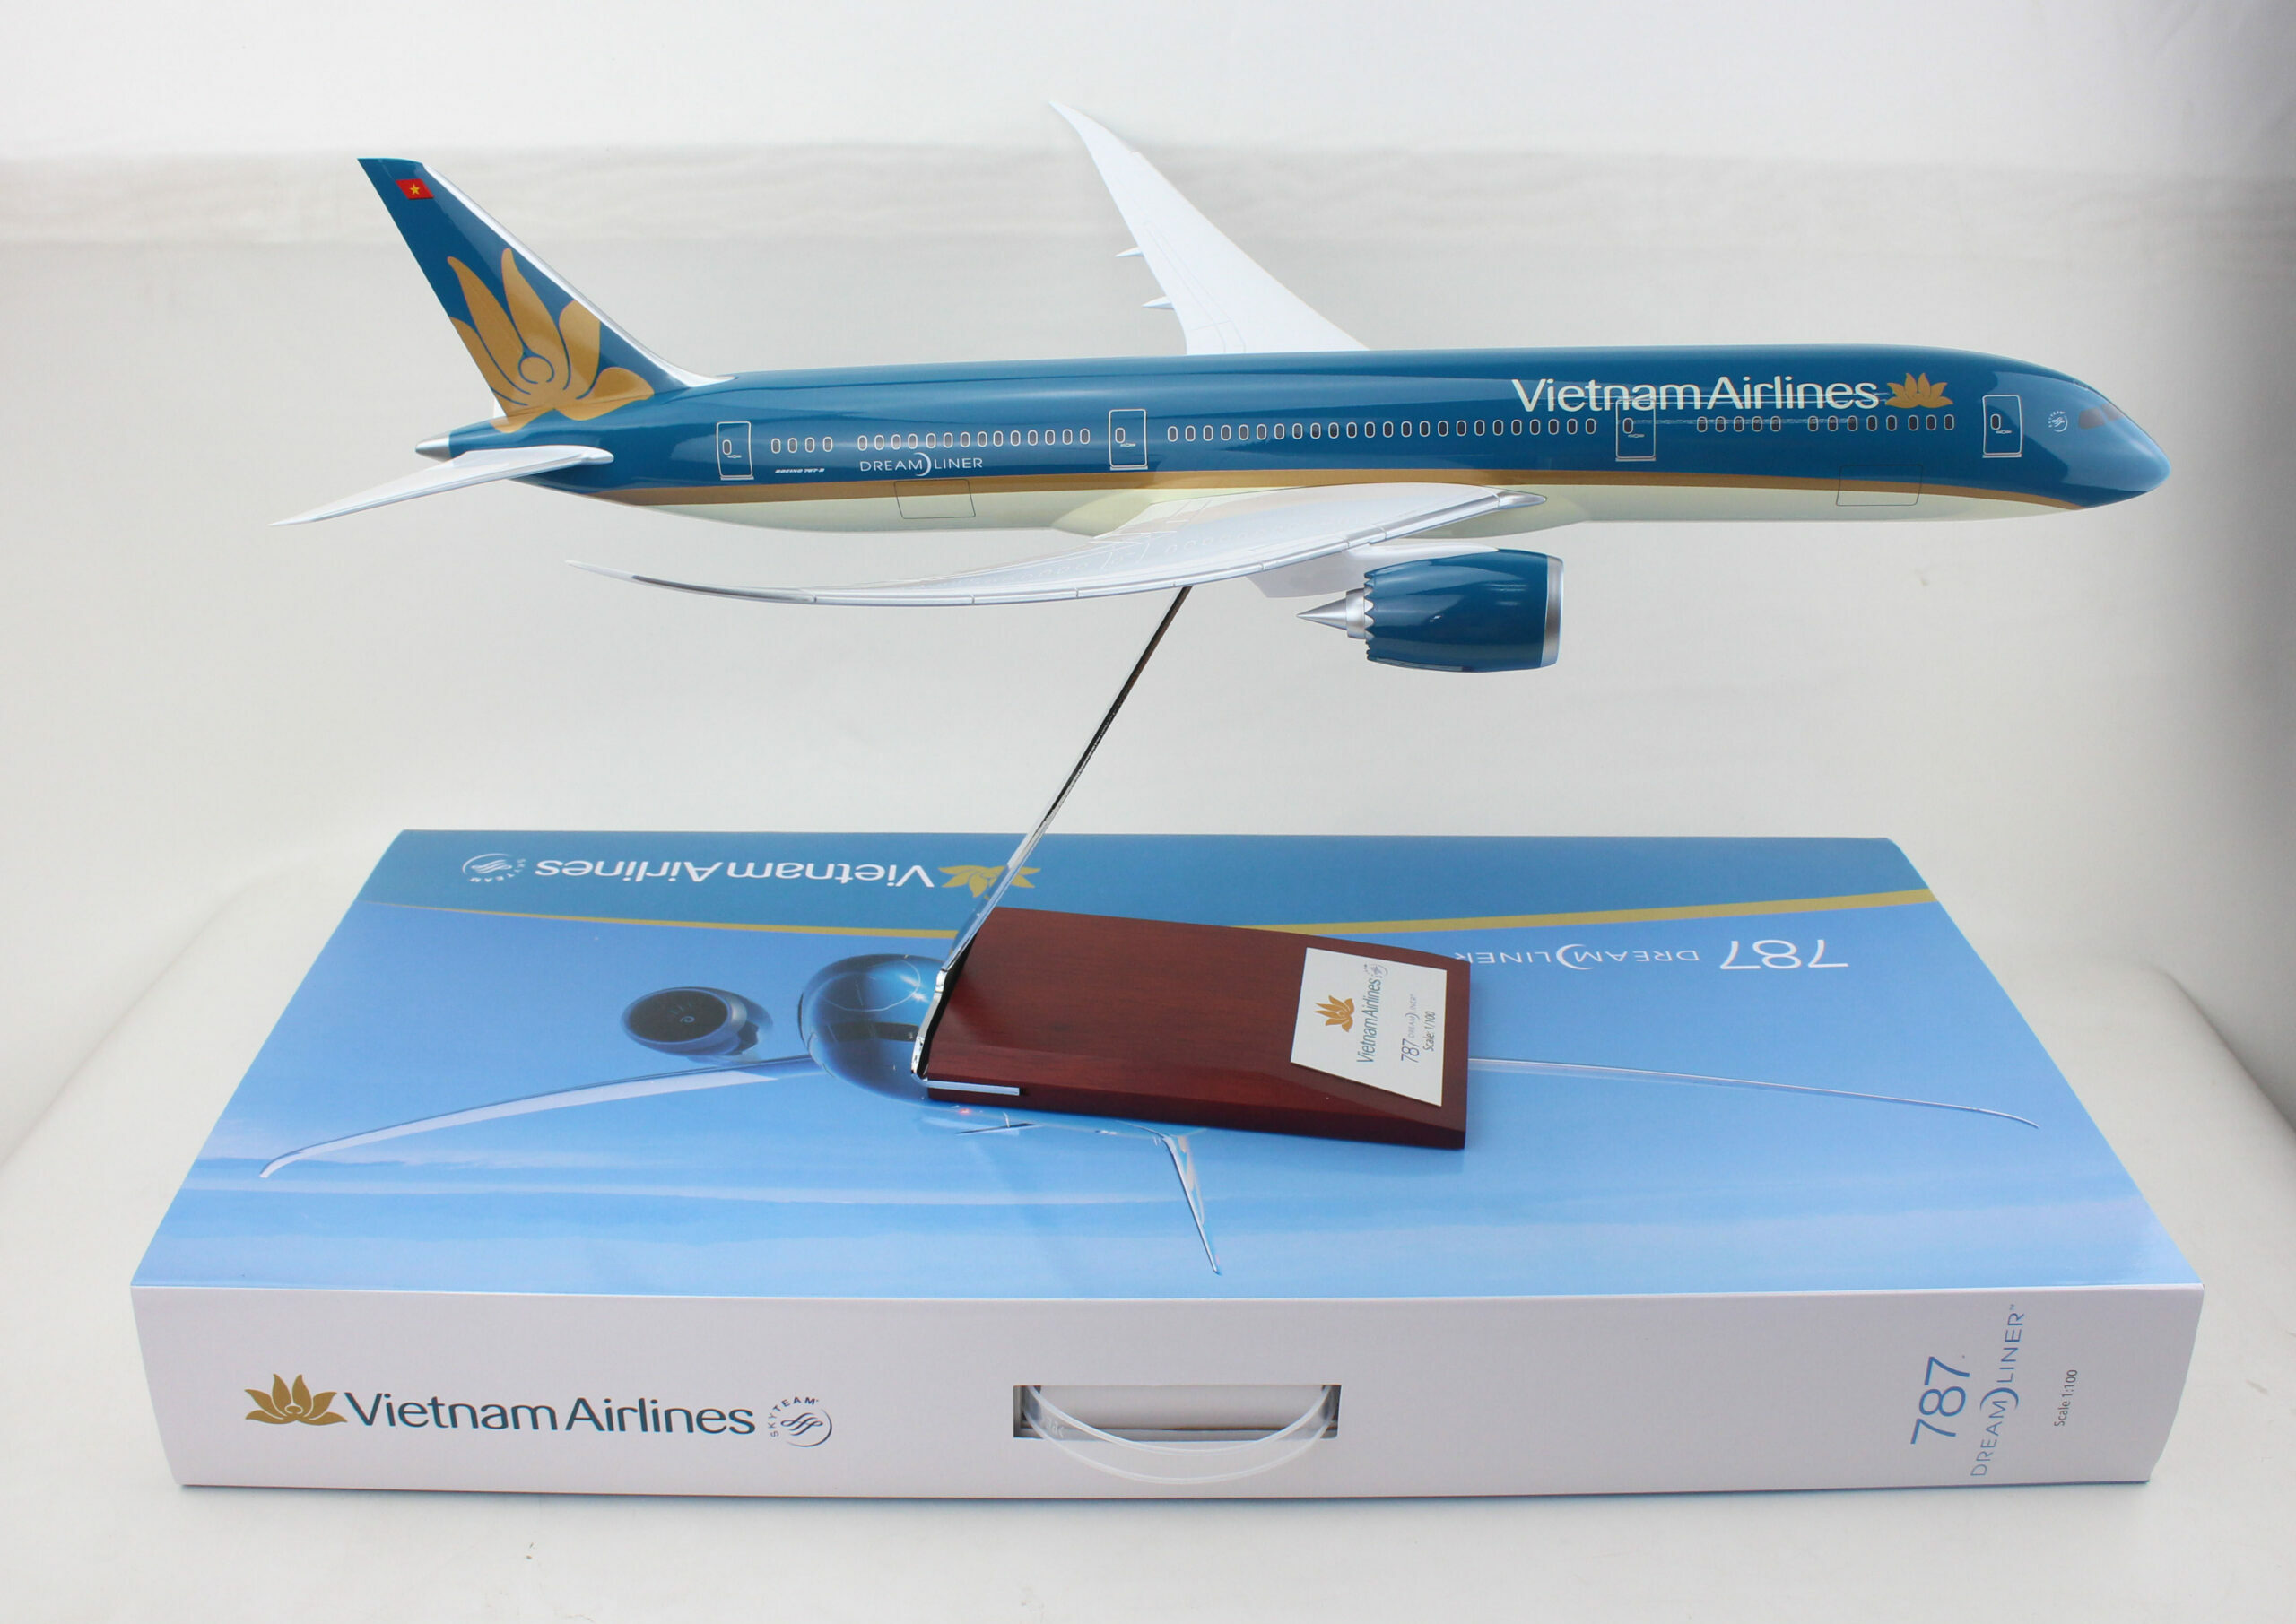 Vietnam Airlines B787-9 in 1-100 scale (3)